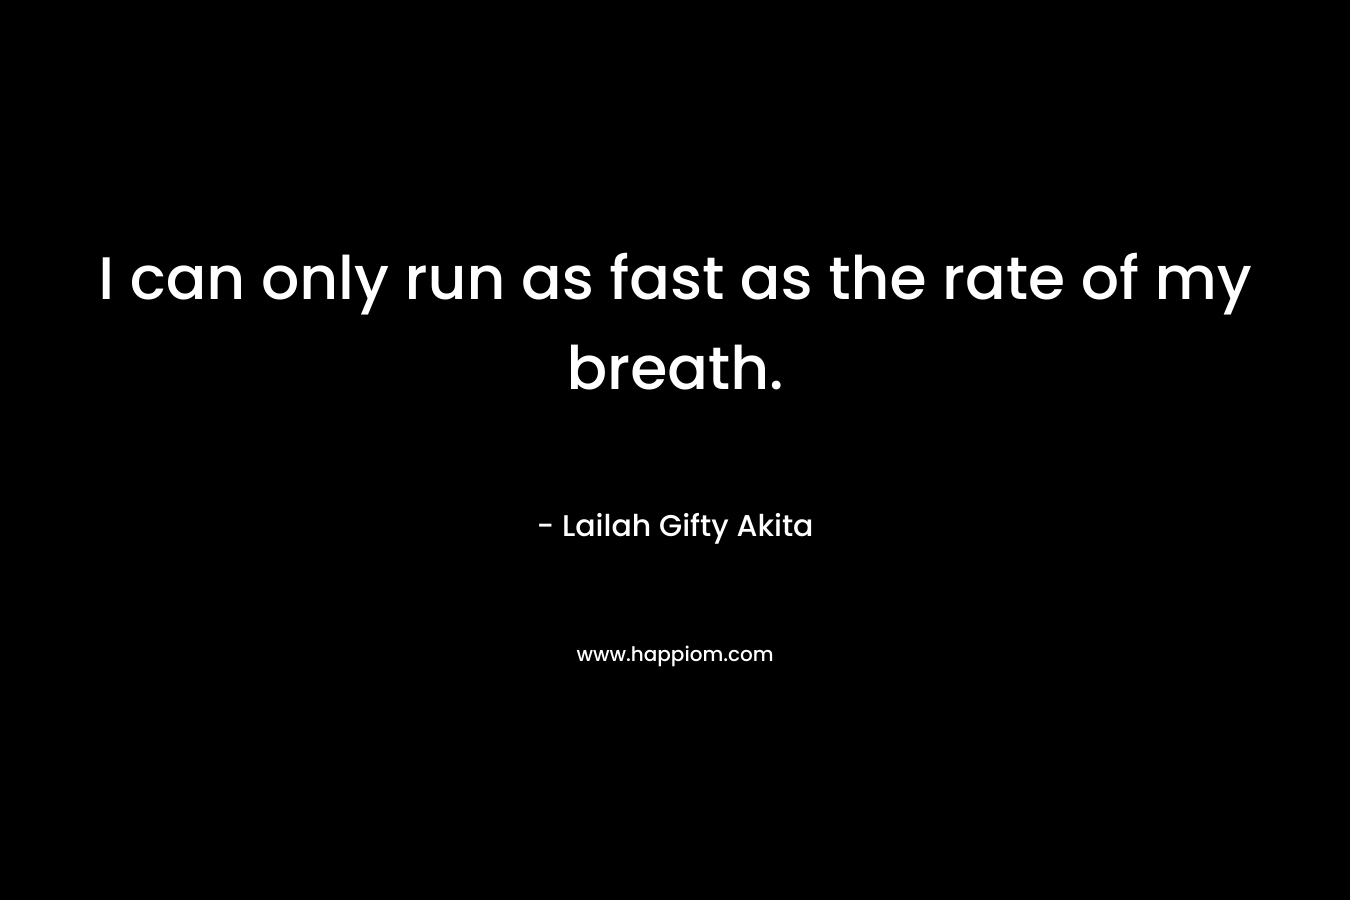 I can only run as fast as the rate of my breath.